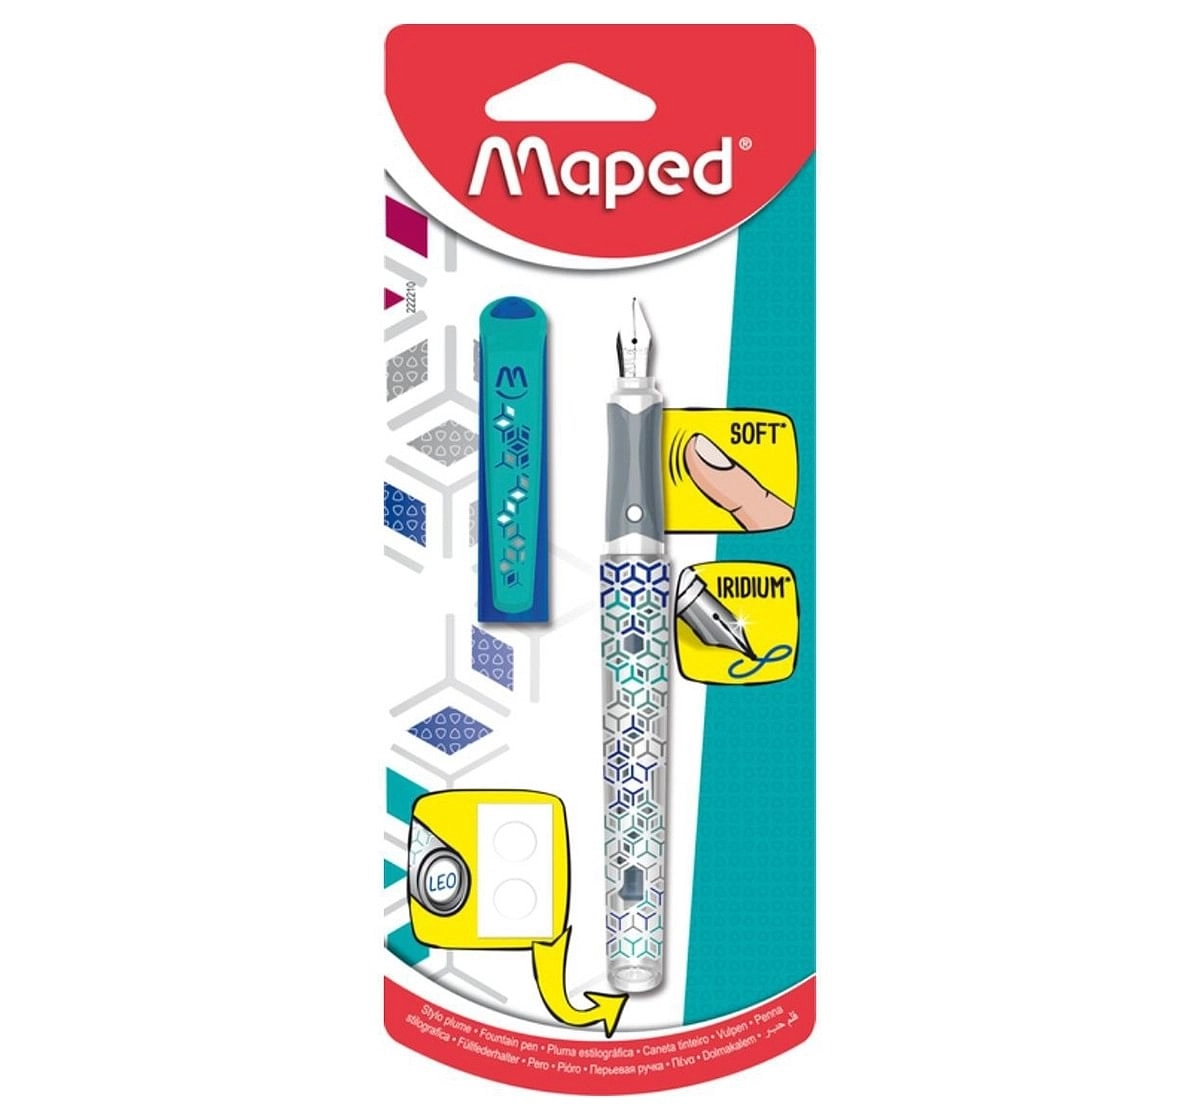 Maped Fountain Pen Classic, 7Y+ (Blue)